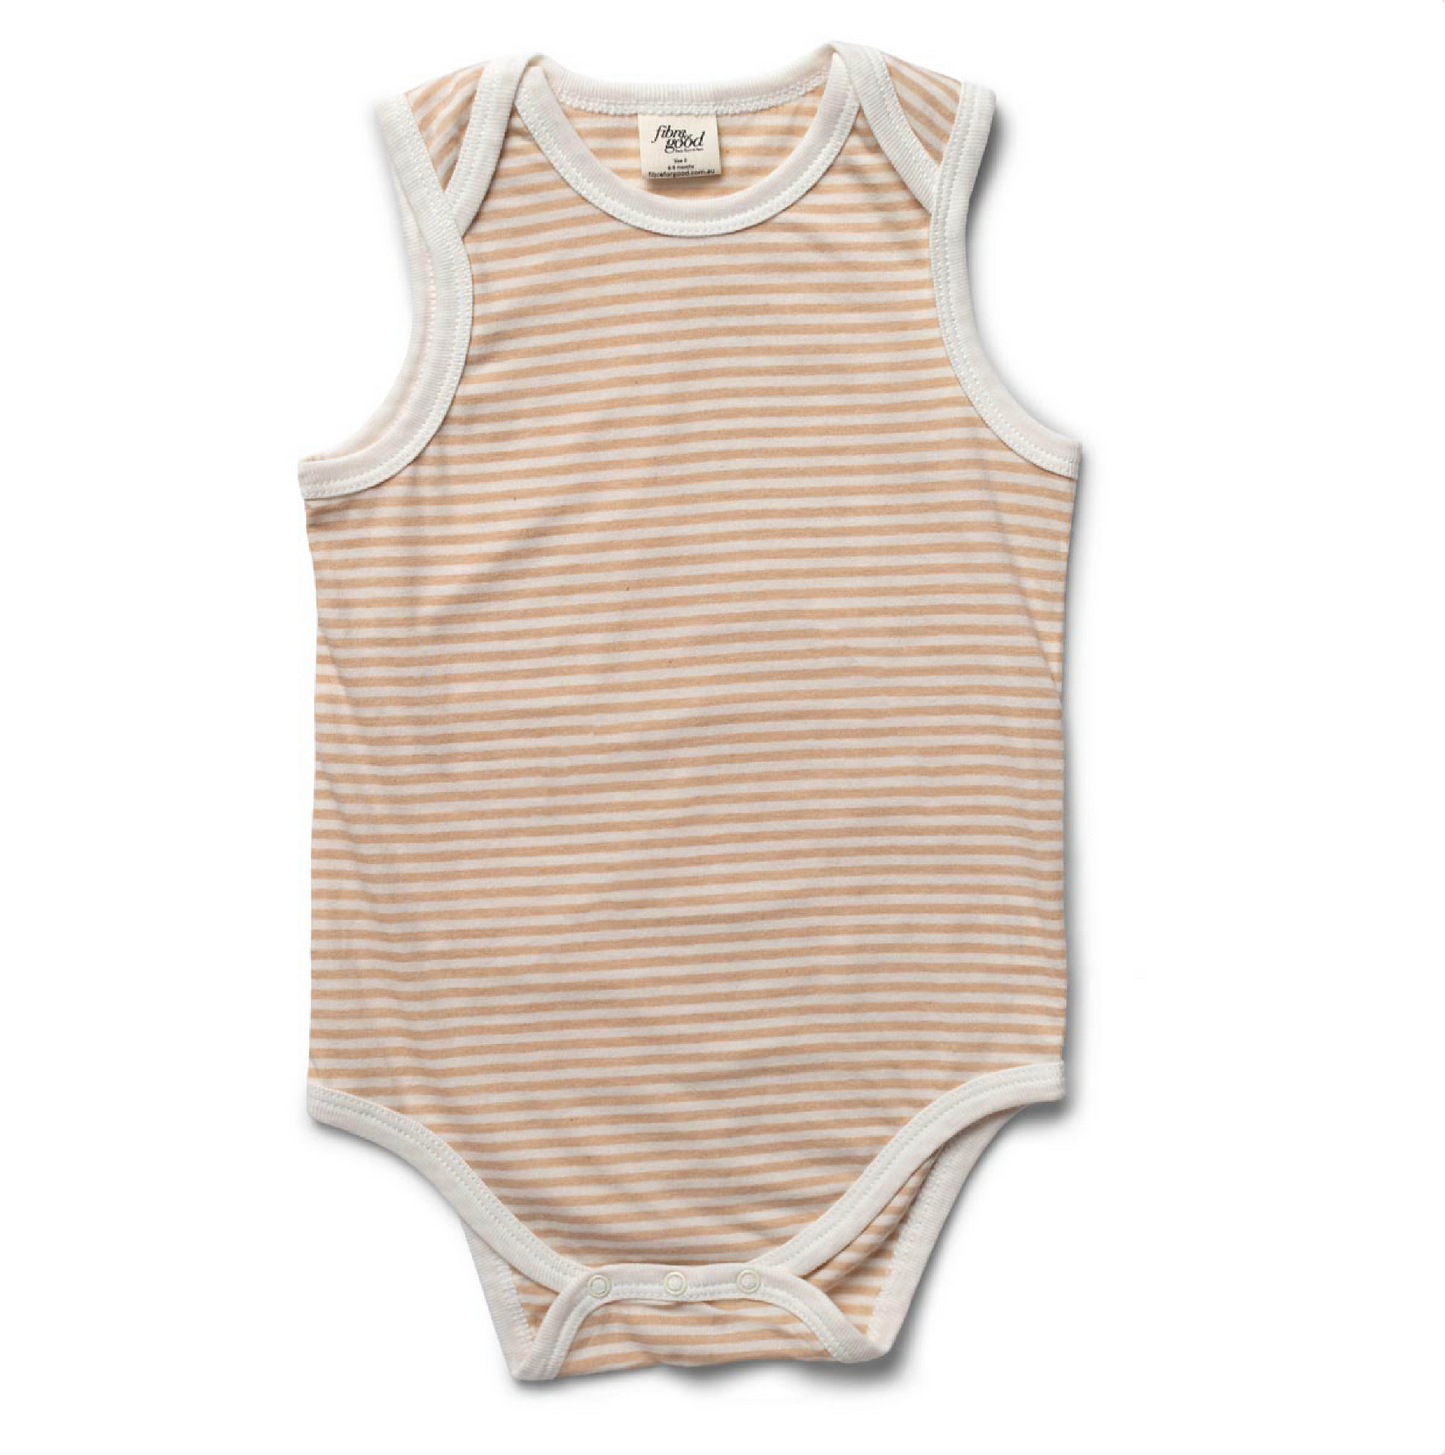 Baby Striped Sleeveless Body Suit , Brown/Nat stripes